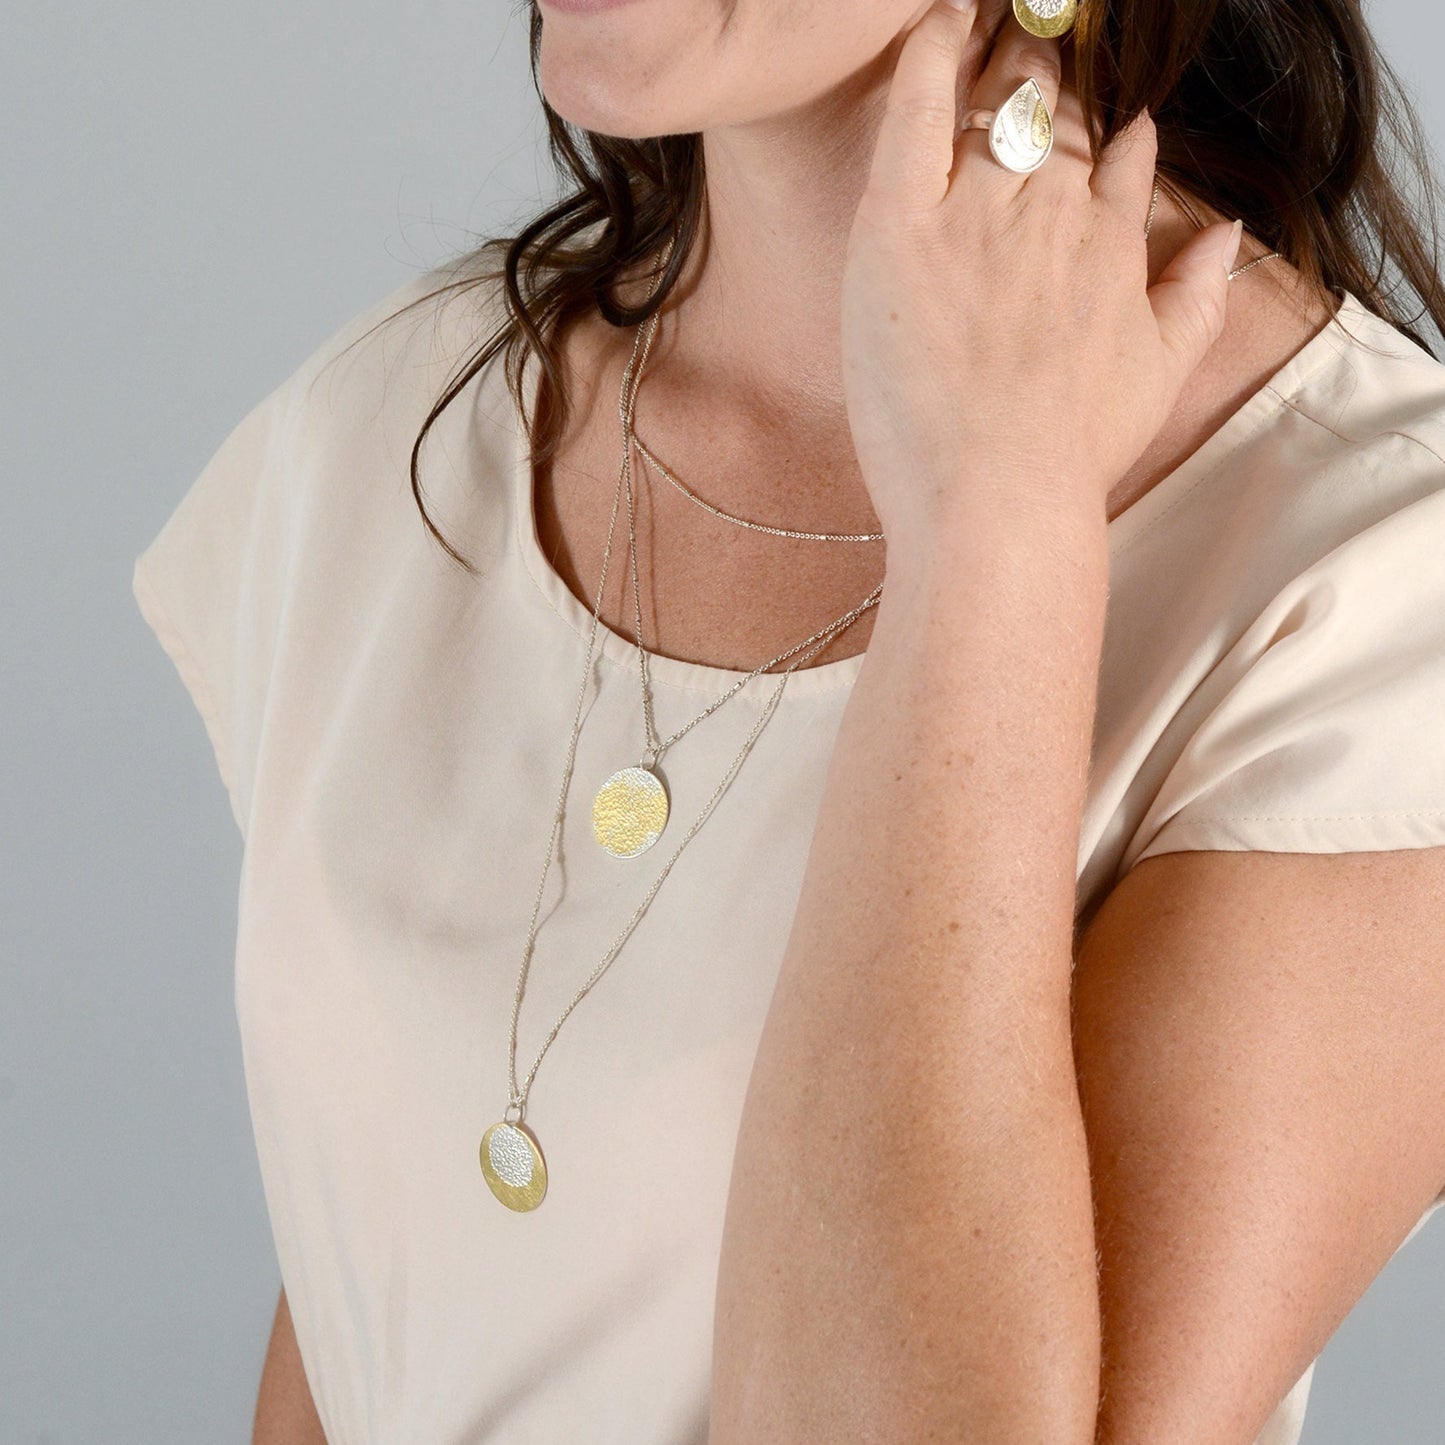 woman wearing layered silver necklaces